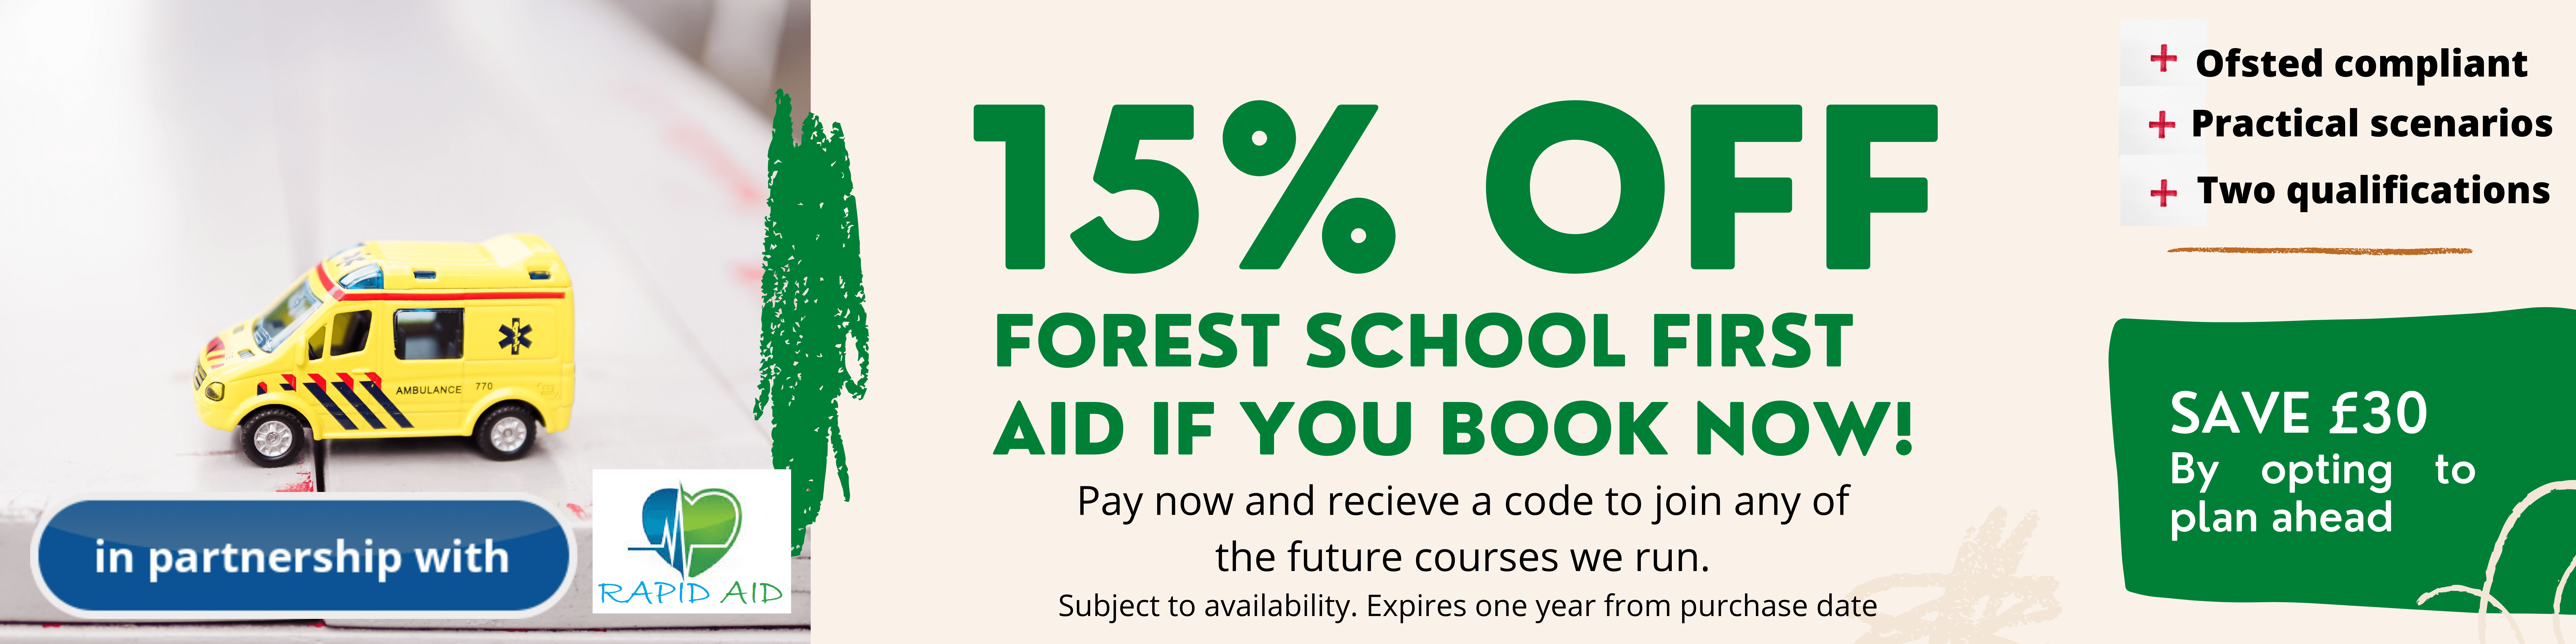 FirstAid_discount Forest School Leader Training - May 2022